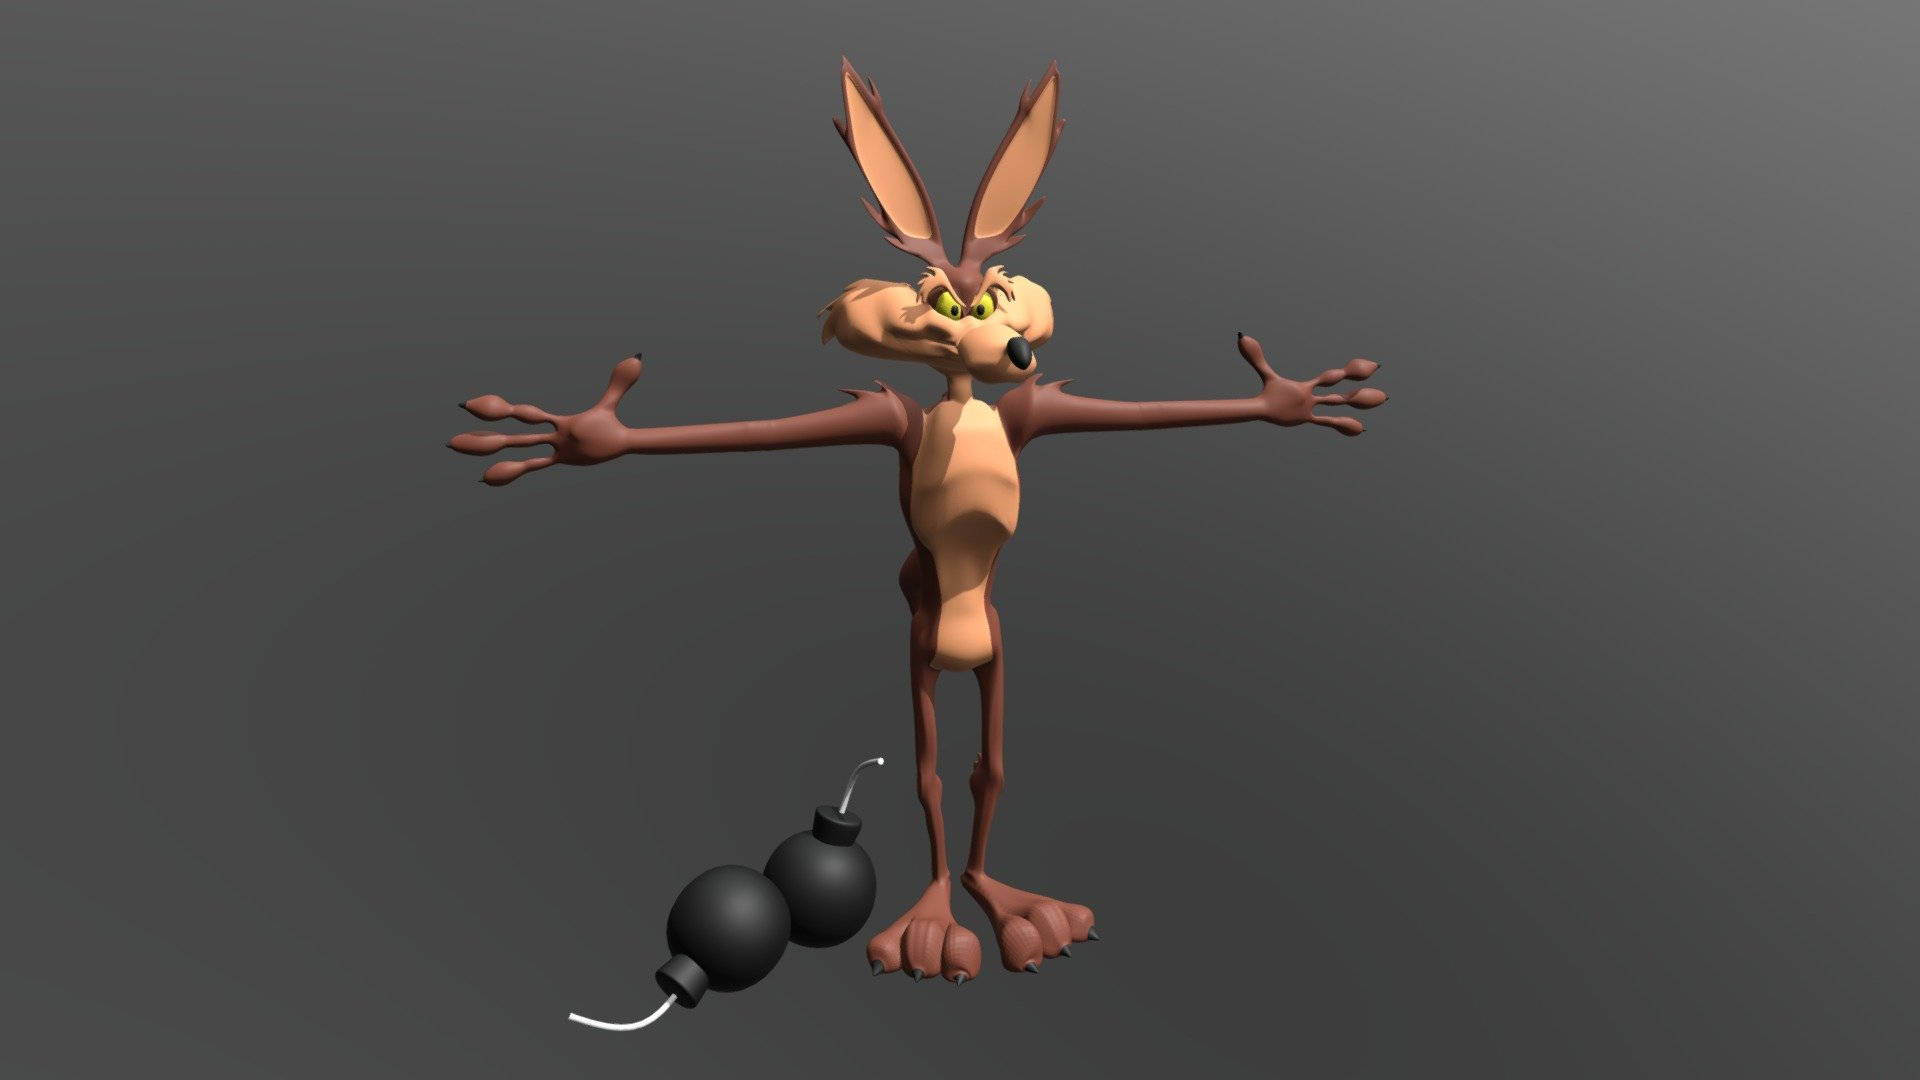 Wile E Coyote With Bombs Background